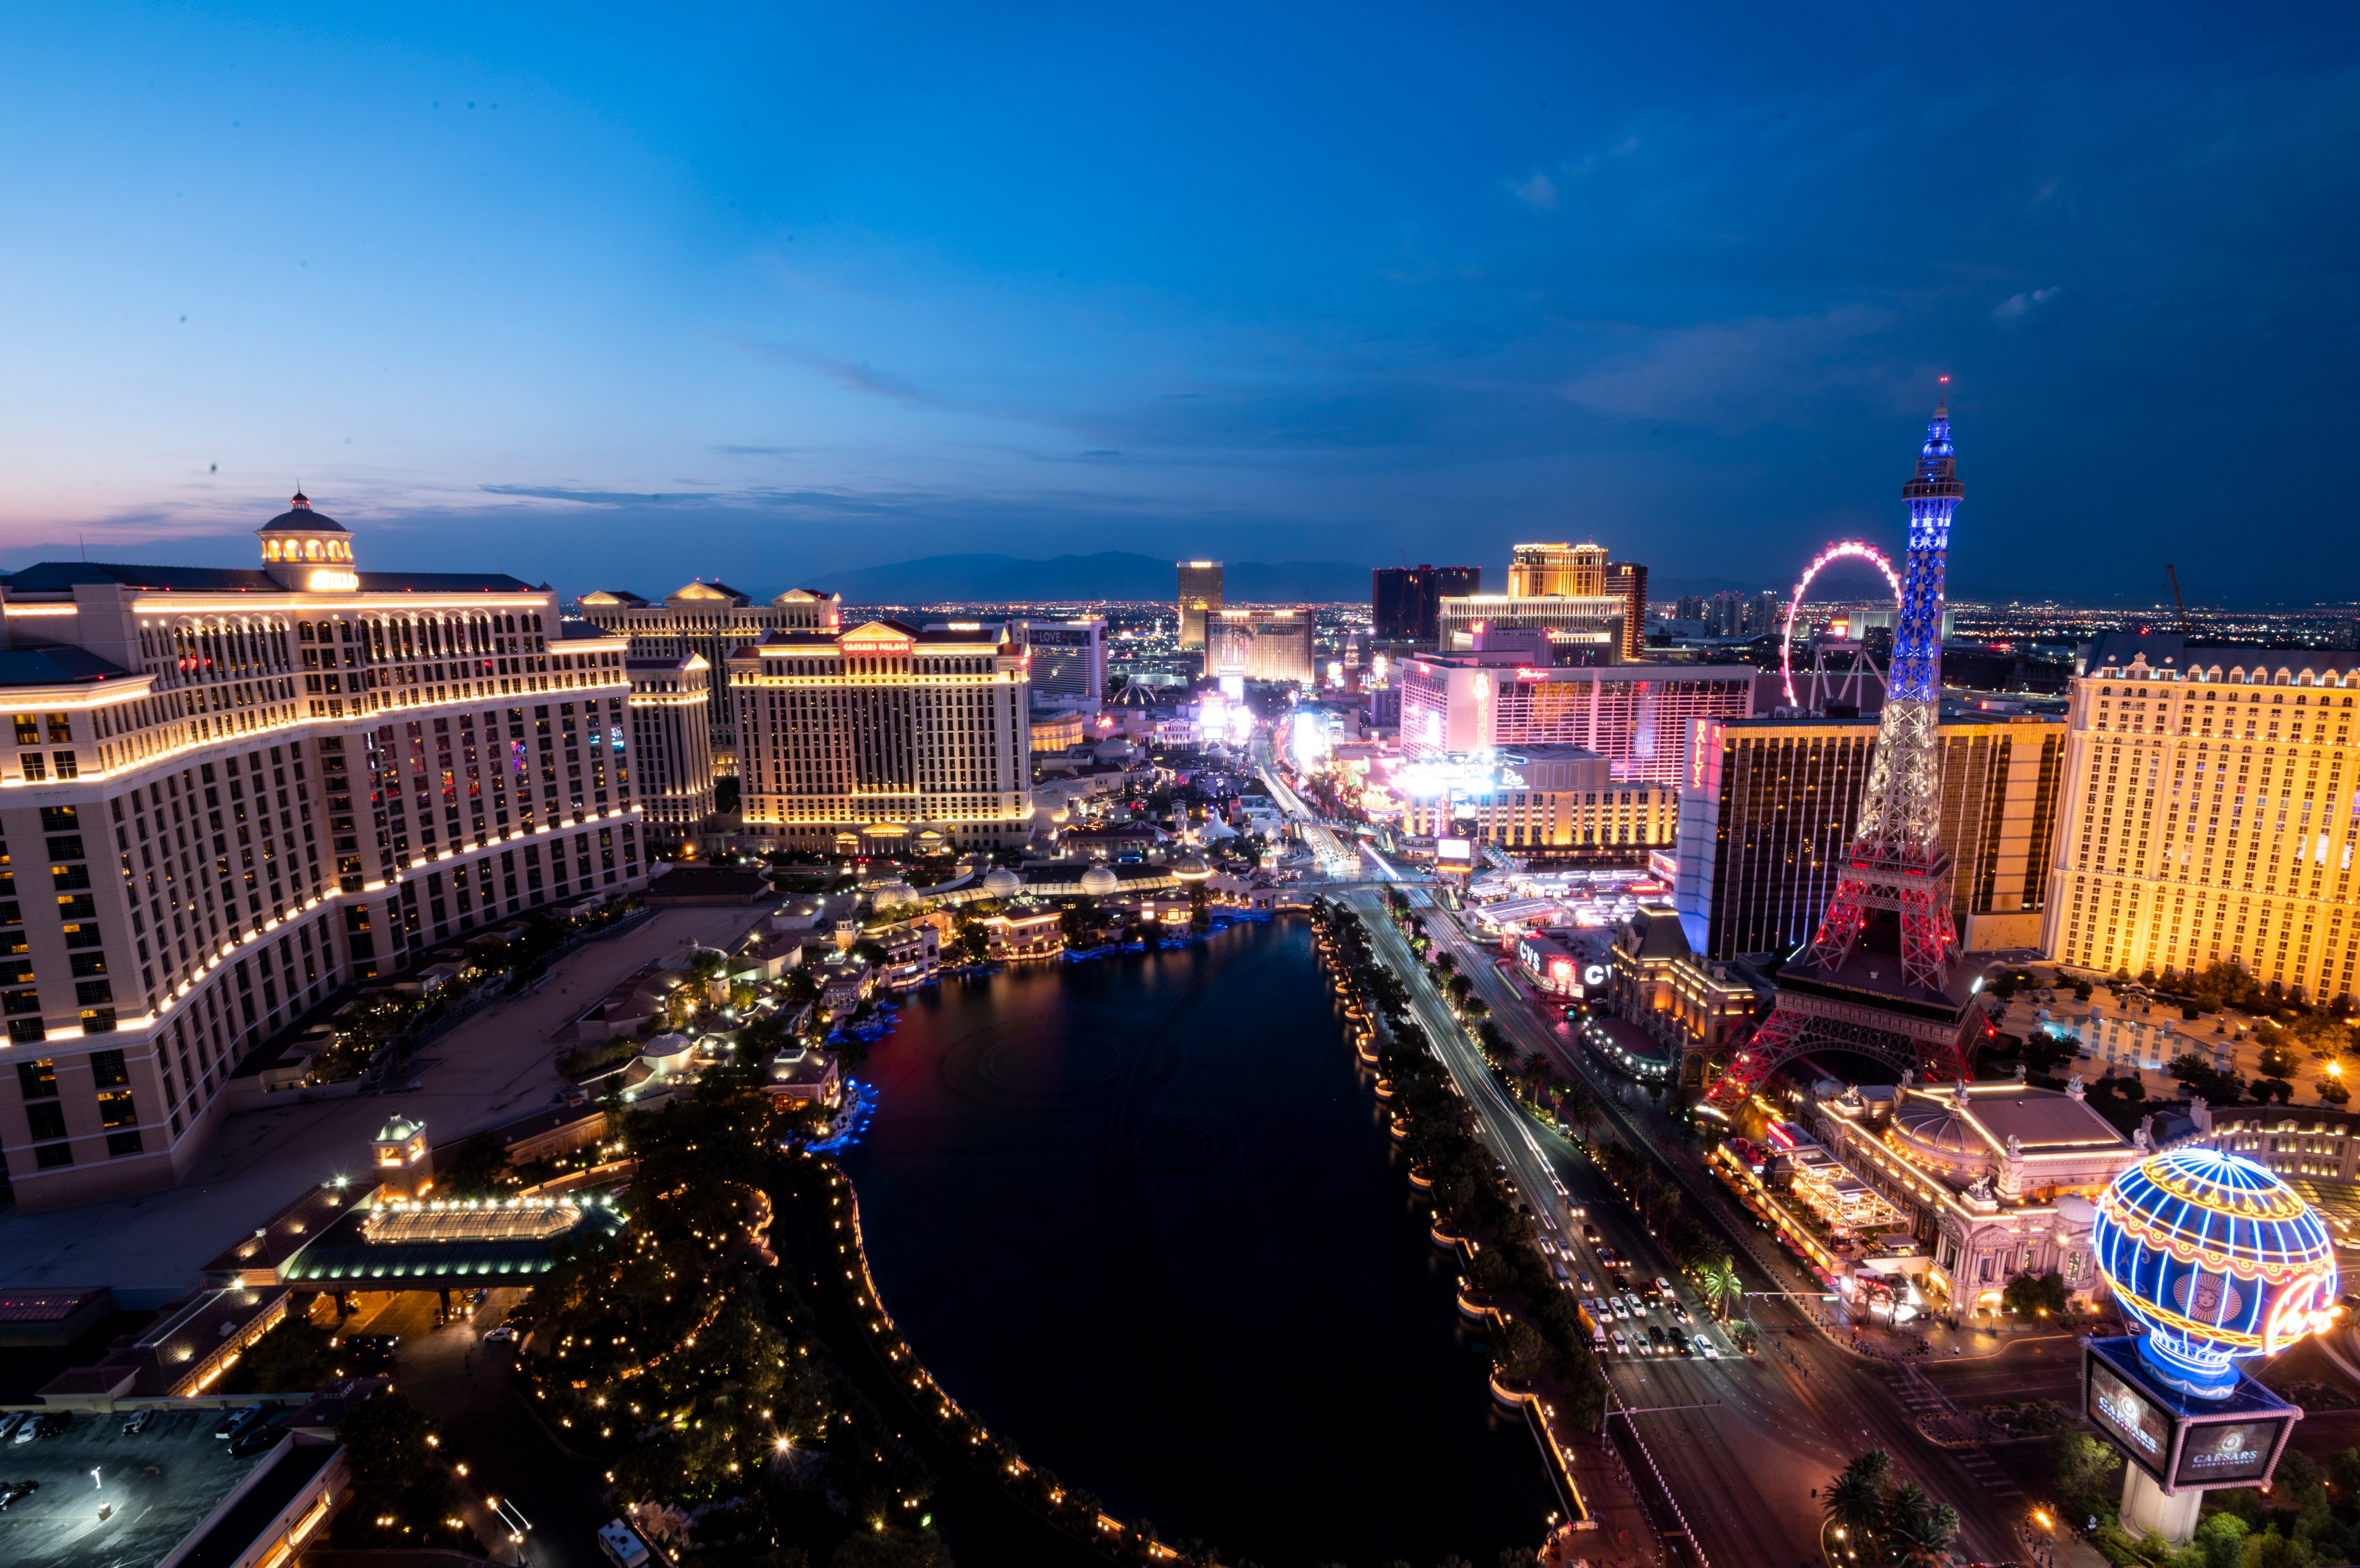 The Las Vegas Strip on Aug. 23, 2020. The coronavirus pandemic has devastated tourism in the city, leaving laid-off workers like Jorge Padilla struggling to get by and hoping their former employers give them their jobs back. (Bill Clark—CQ/Roll Call, Inc/Getty Images)